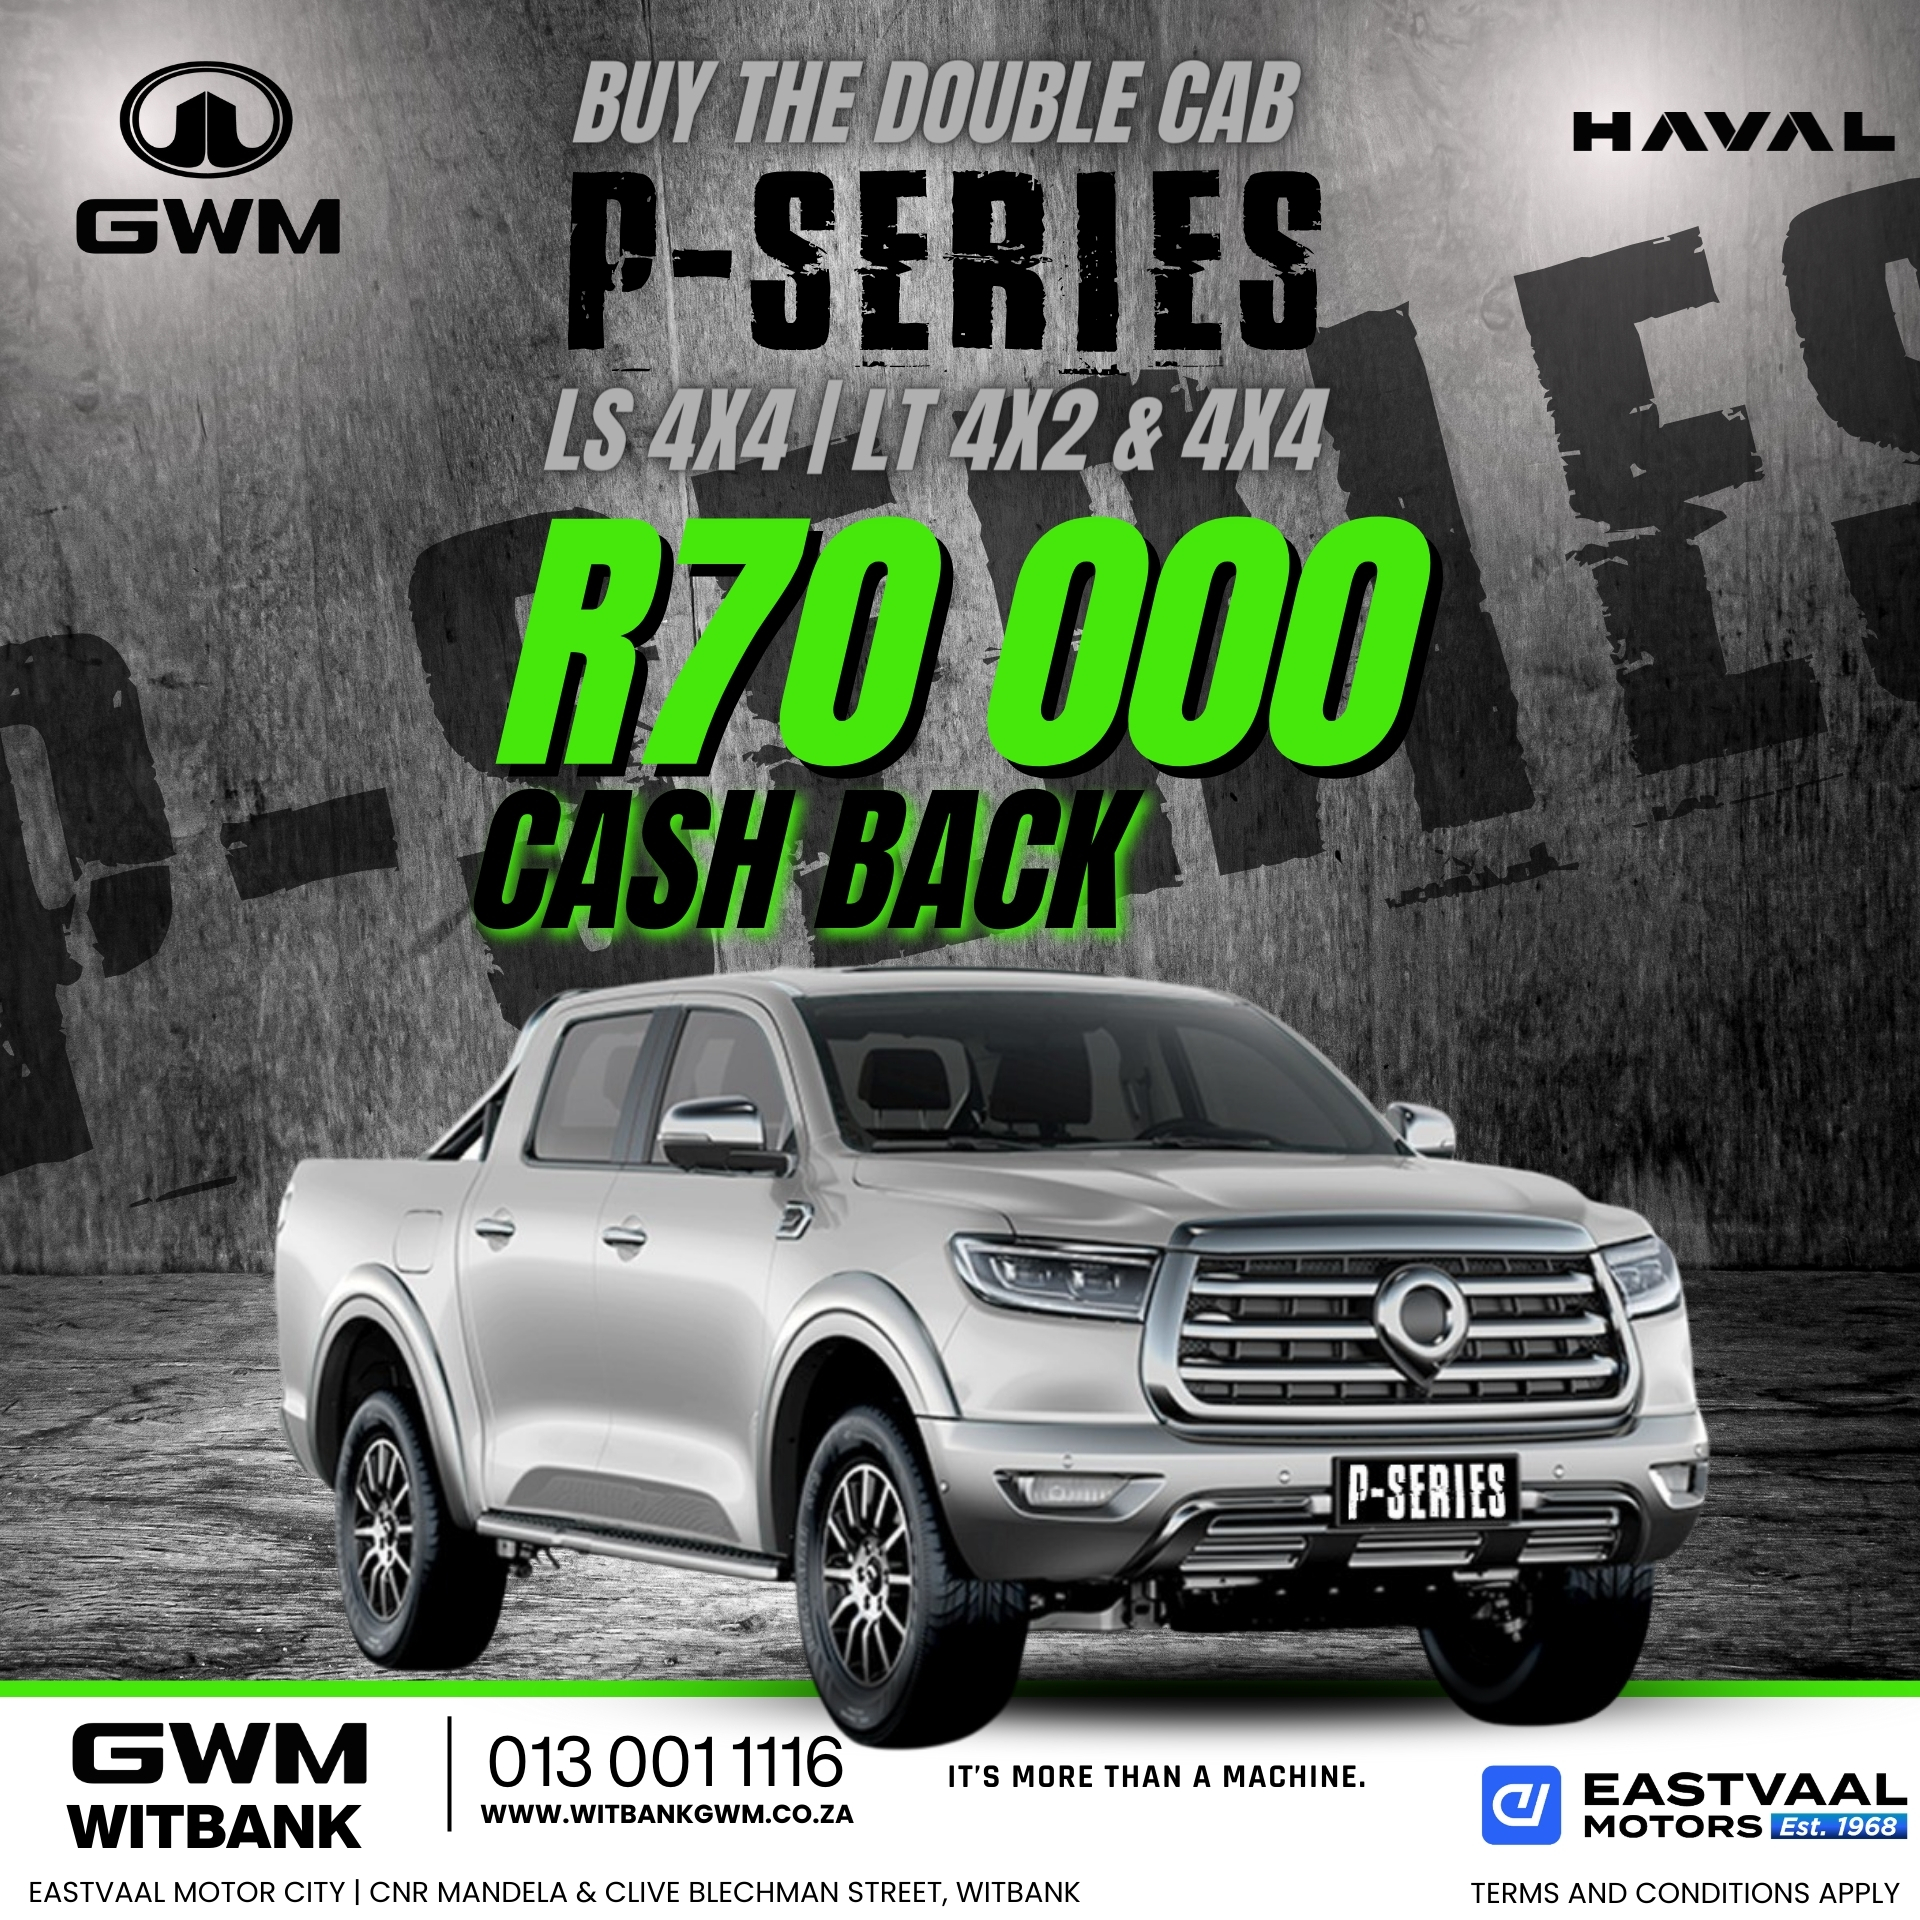 Discover the unmatched luxury and rugged reliability of Haval GWM this July at Eastvaal Motor City! image from Eastvaal Motors